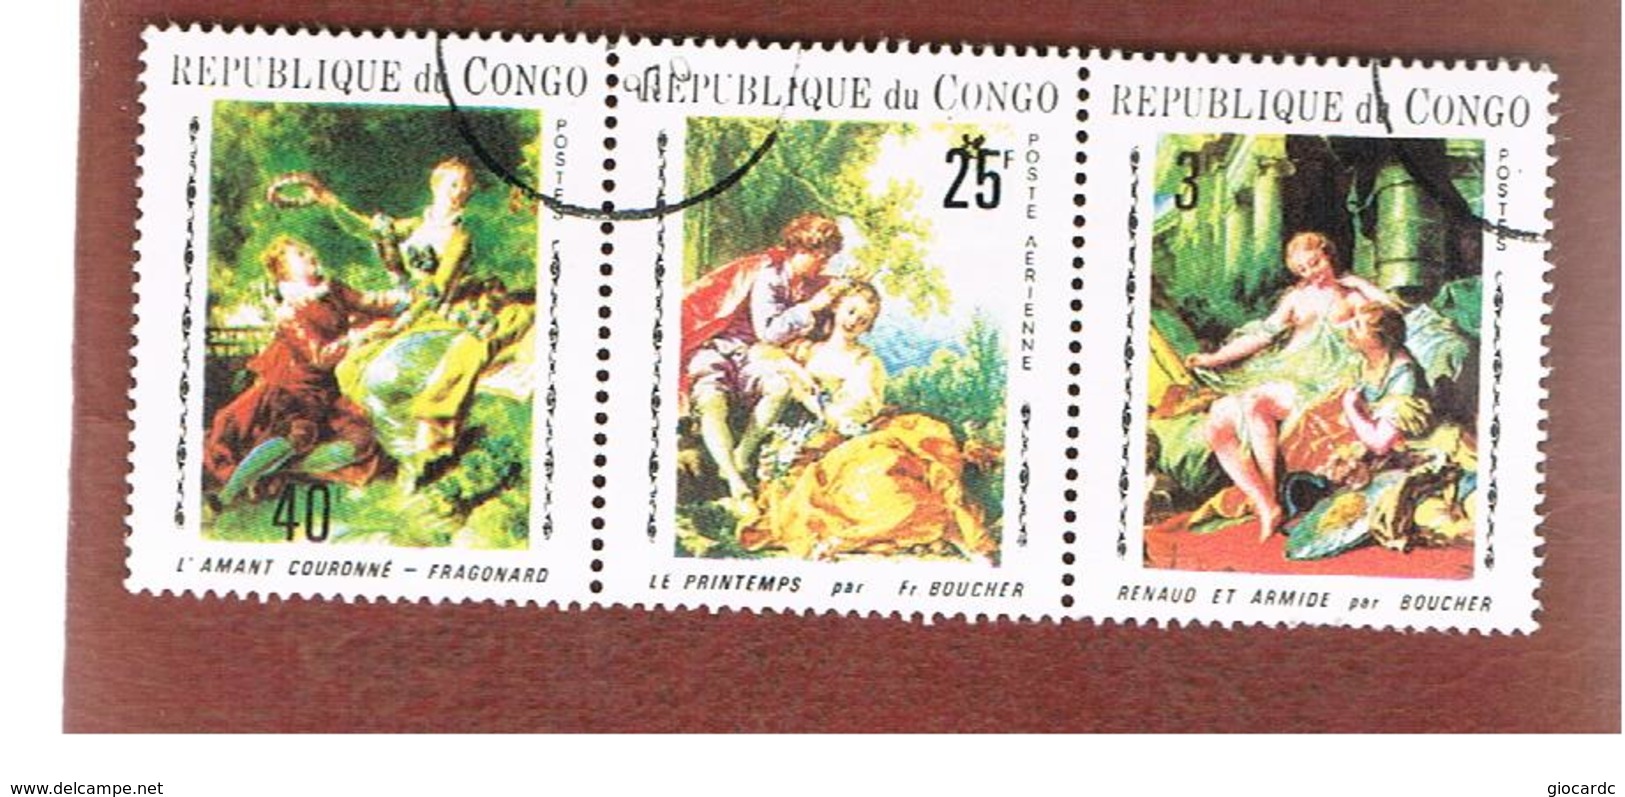 CONGO (BRAZZAVILLE) - MI 222.224 -  1970  BAROQUE PAINTINGS (COMPLET SET OF 3 SE-TENANT) - USED ° - Afgestempeld